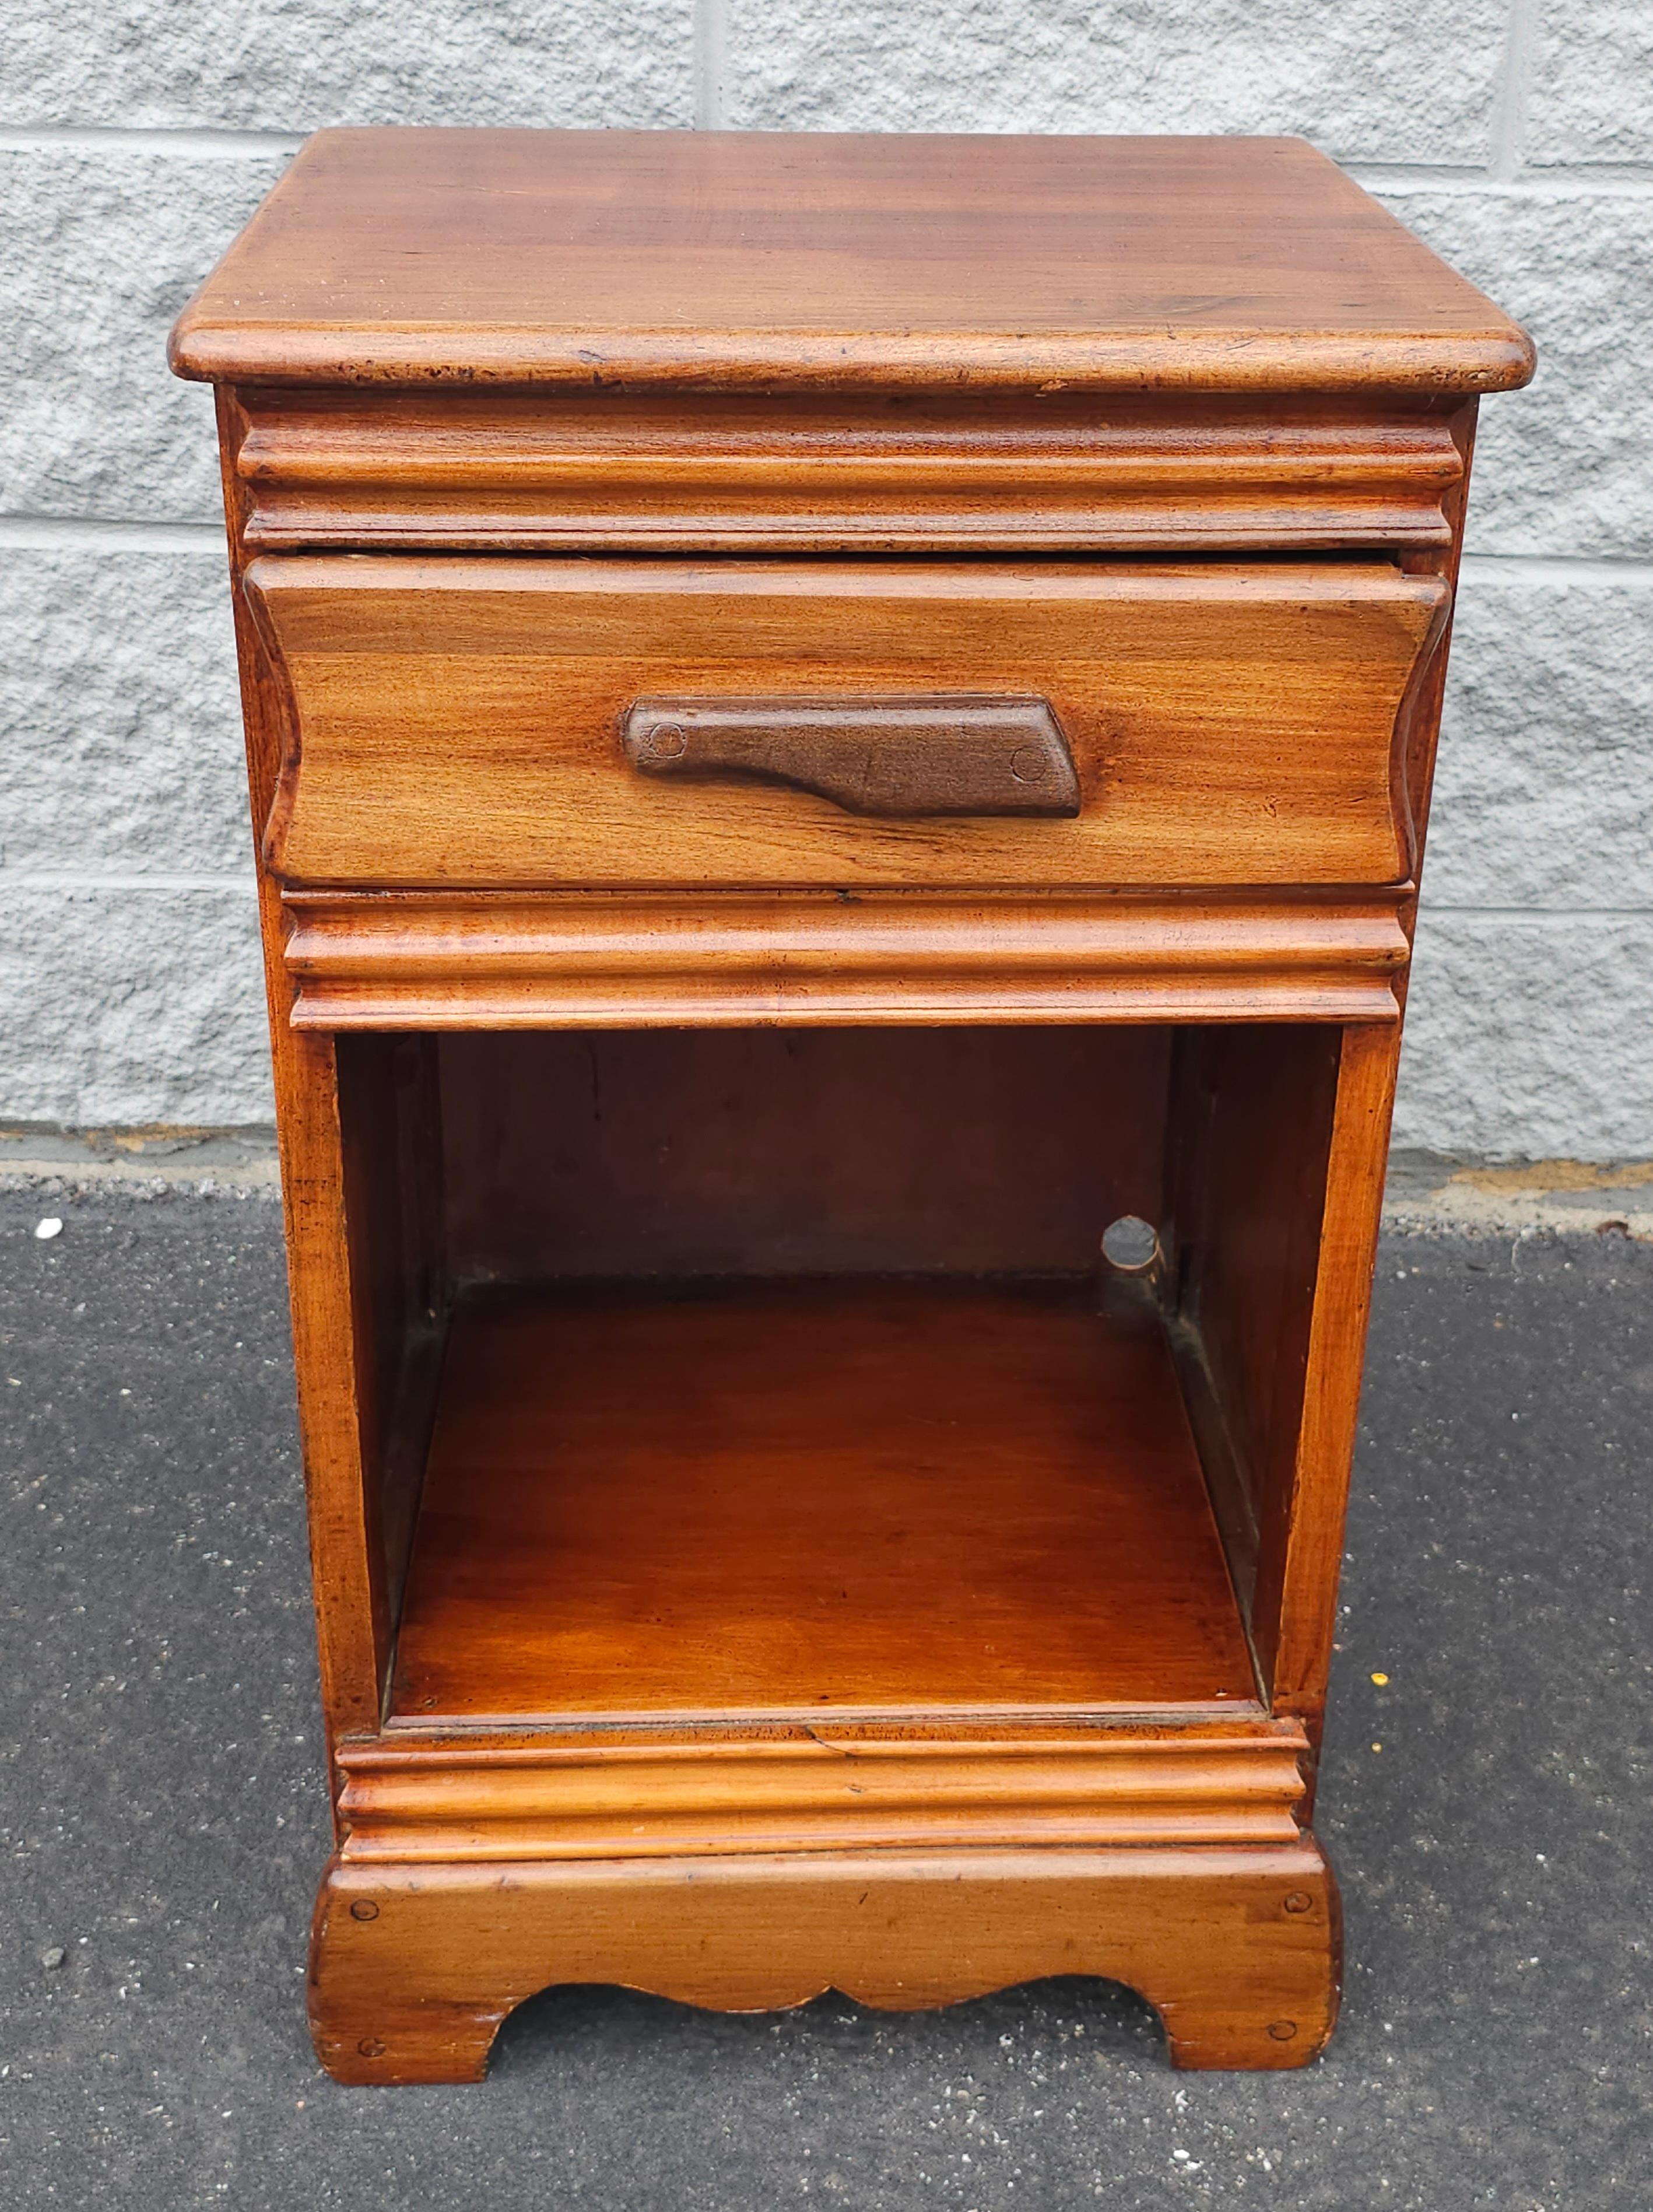 An Early 20th Century Victorian Single Drawer Mahogany BedSide Table. Measures 16